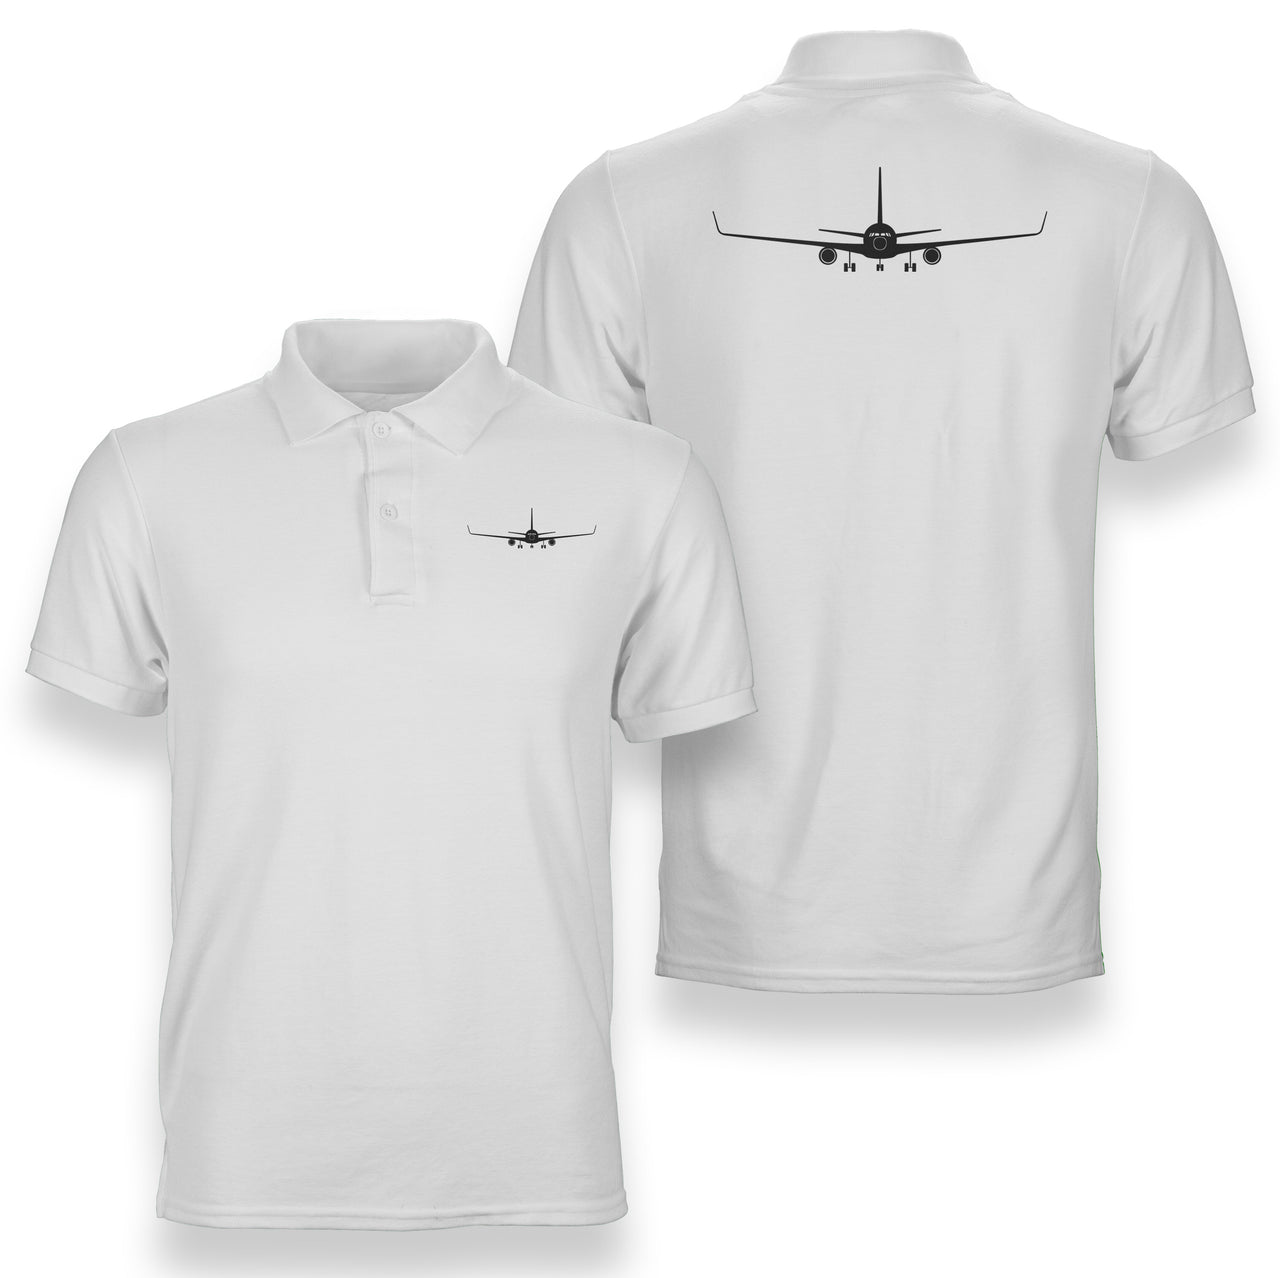 Boeing 767 Silhouette Designed Double Side Polo T-Shirts